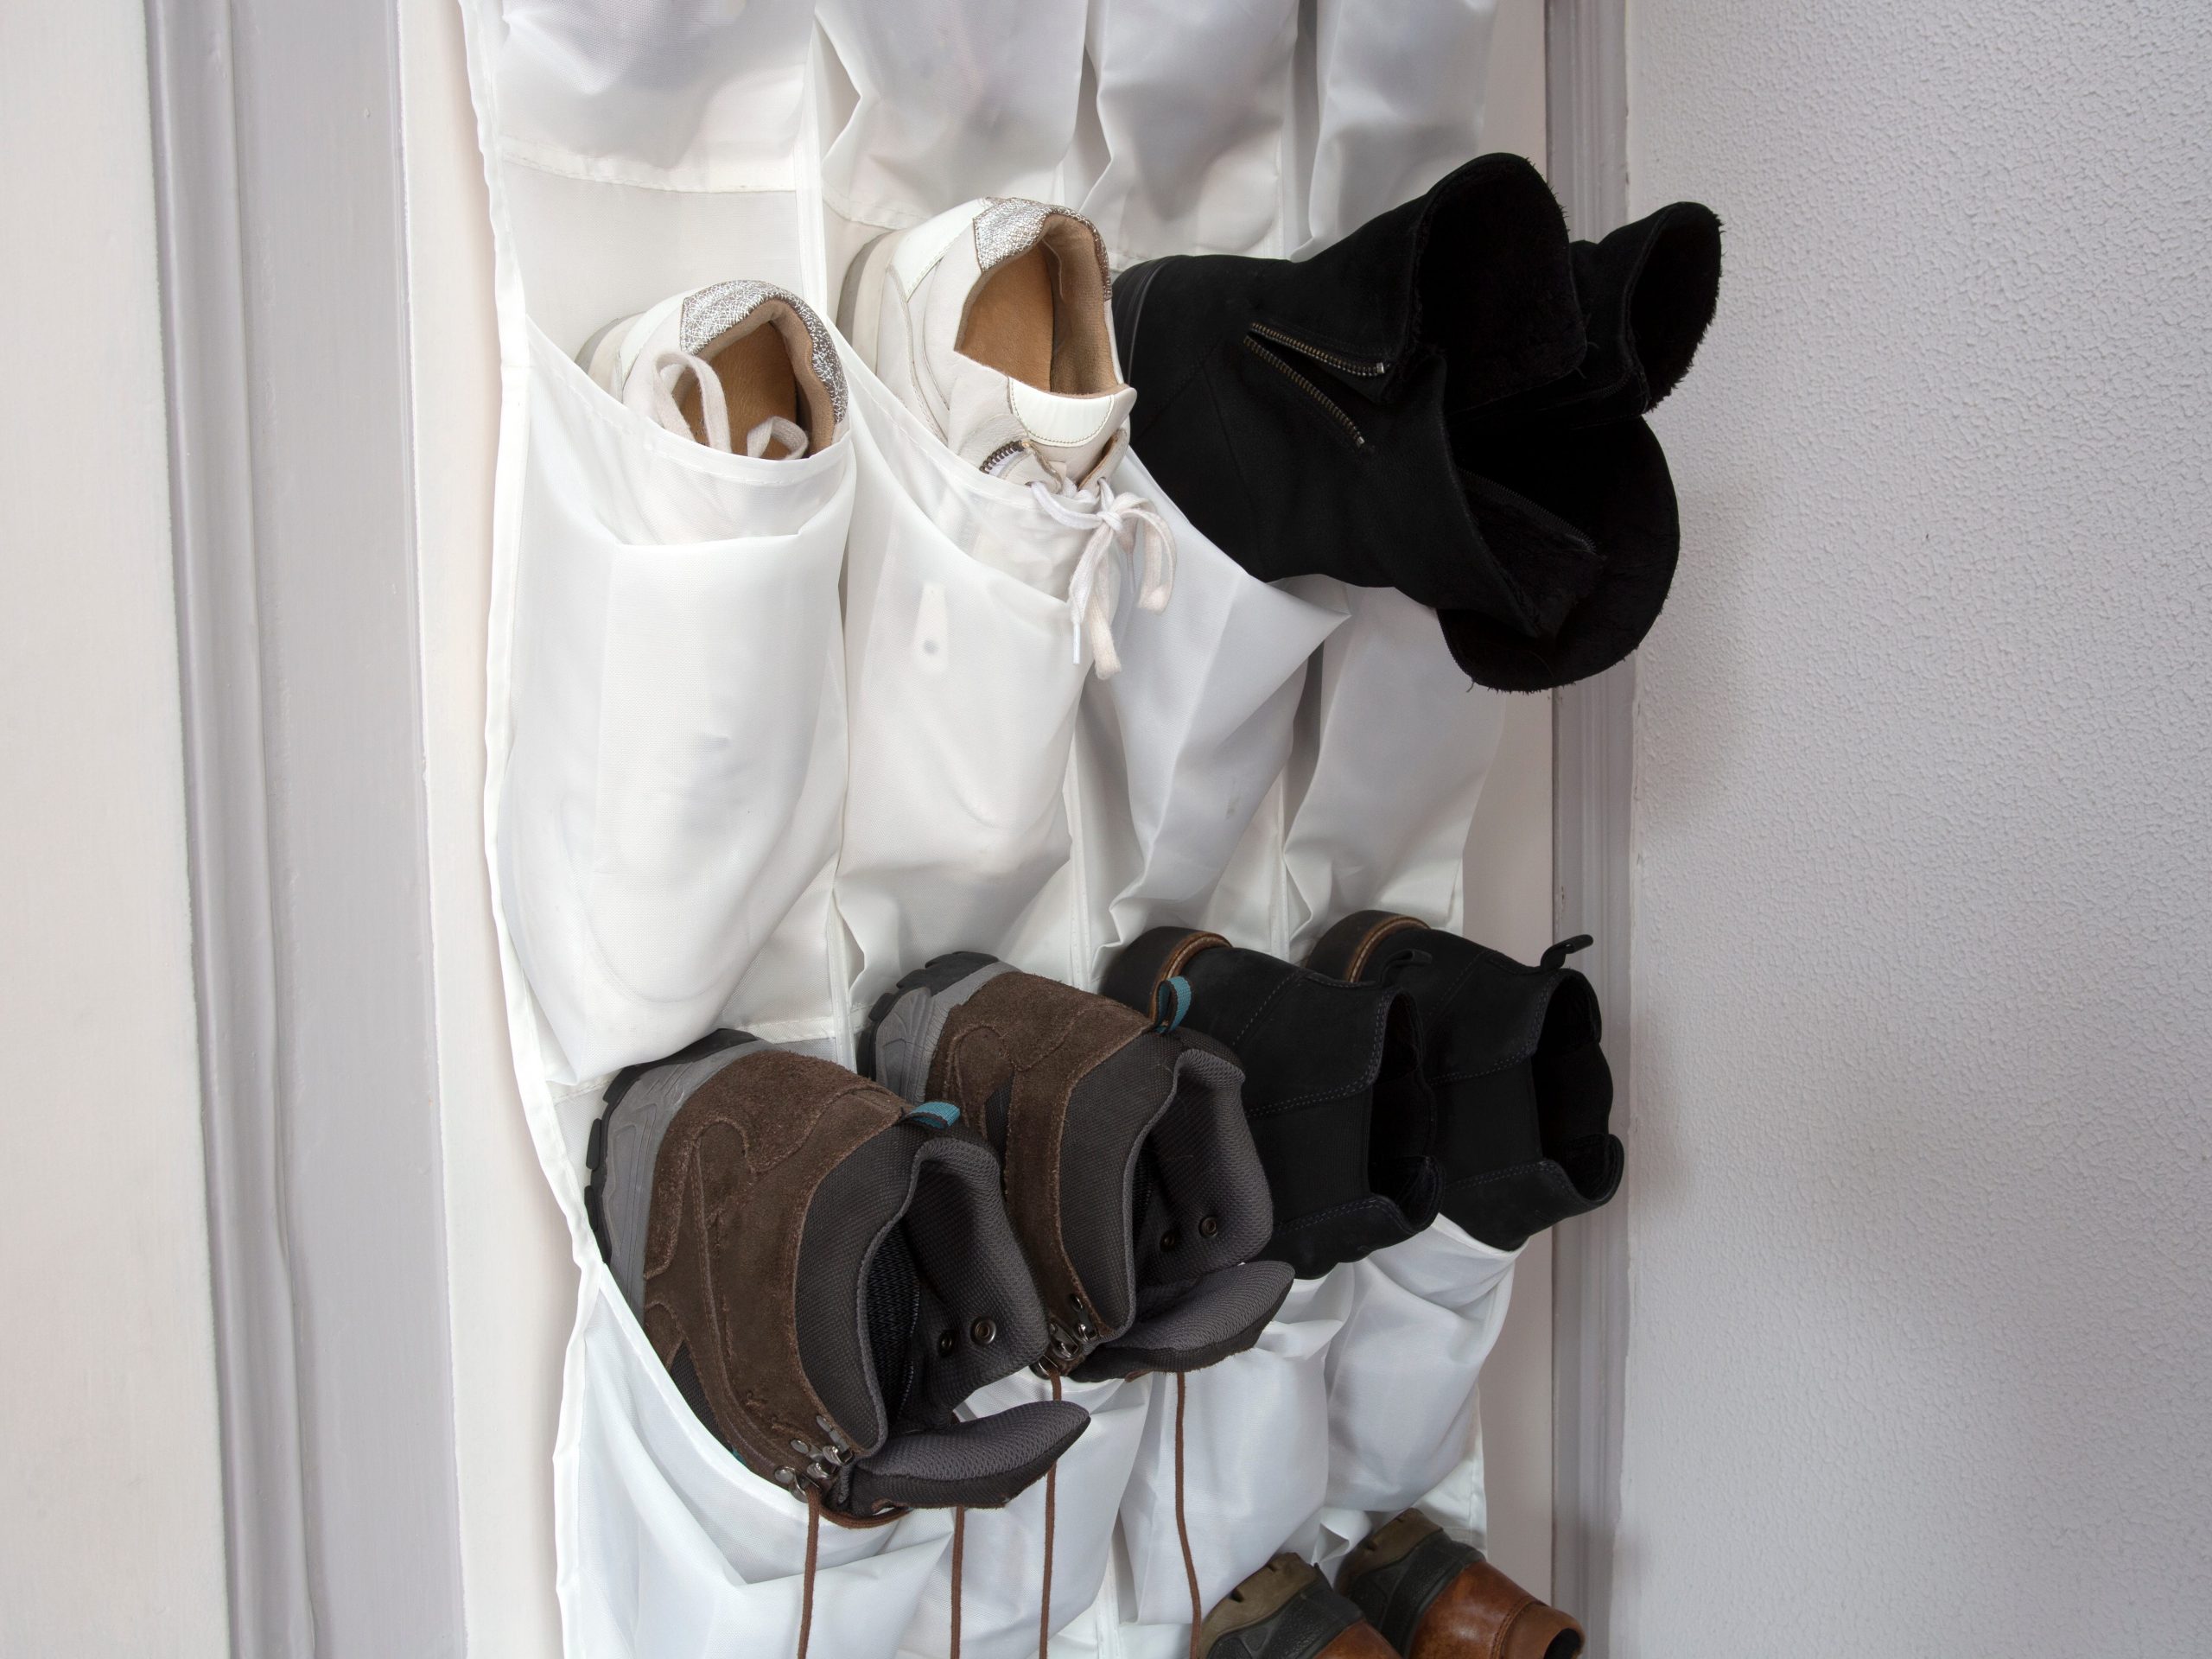 White shoe hanger with shoes in it on door